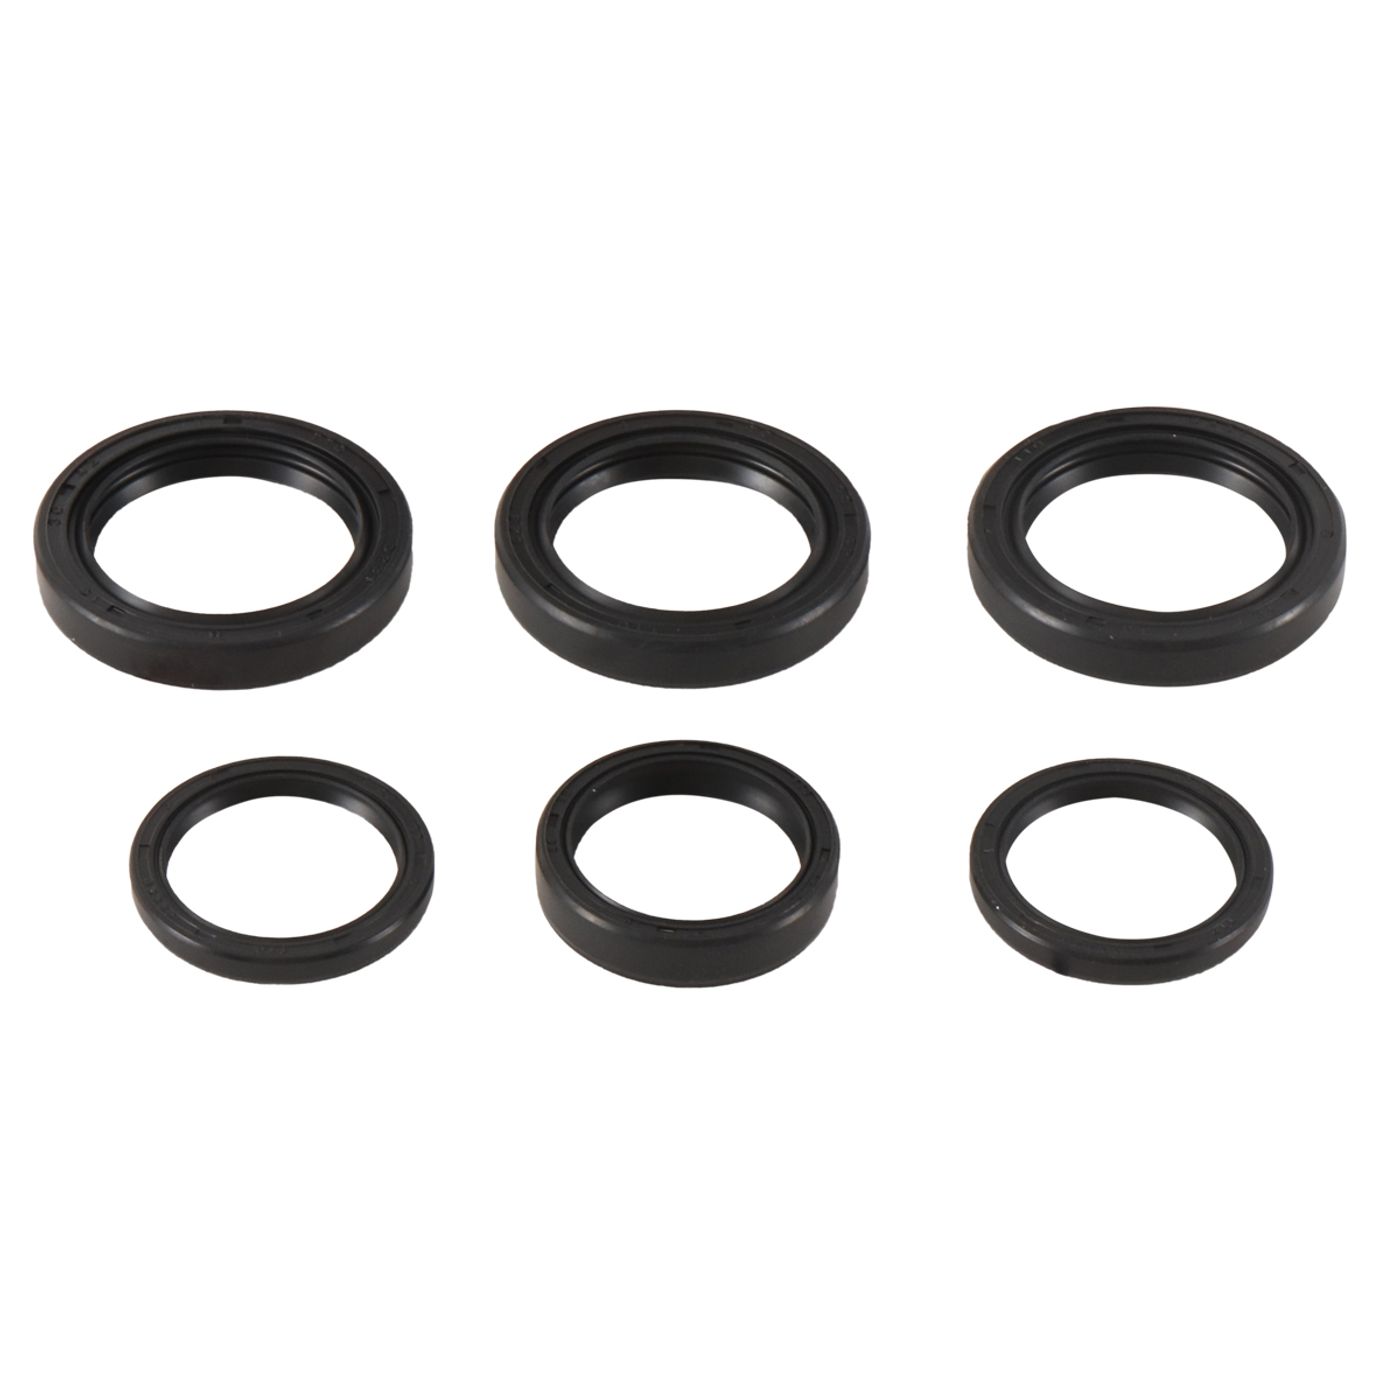 Wrp Diff Seal Kits - WRP252065-5 image